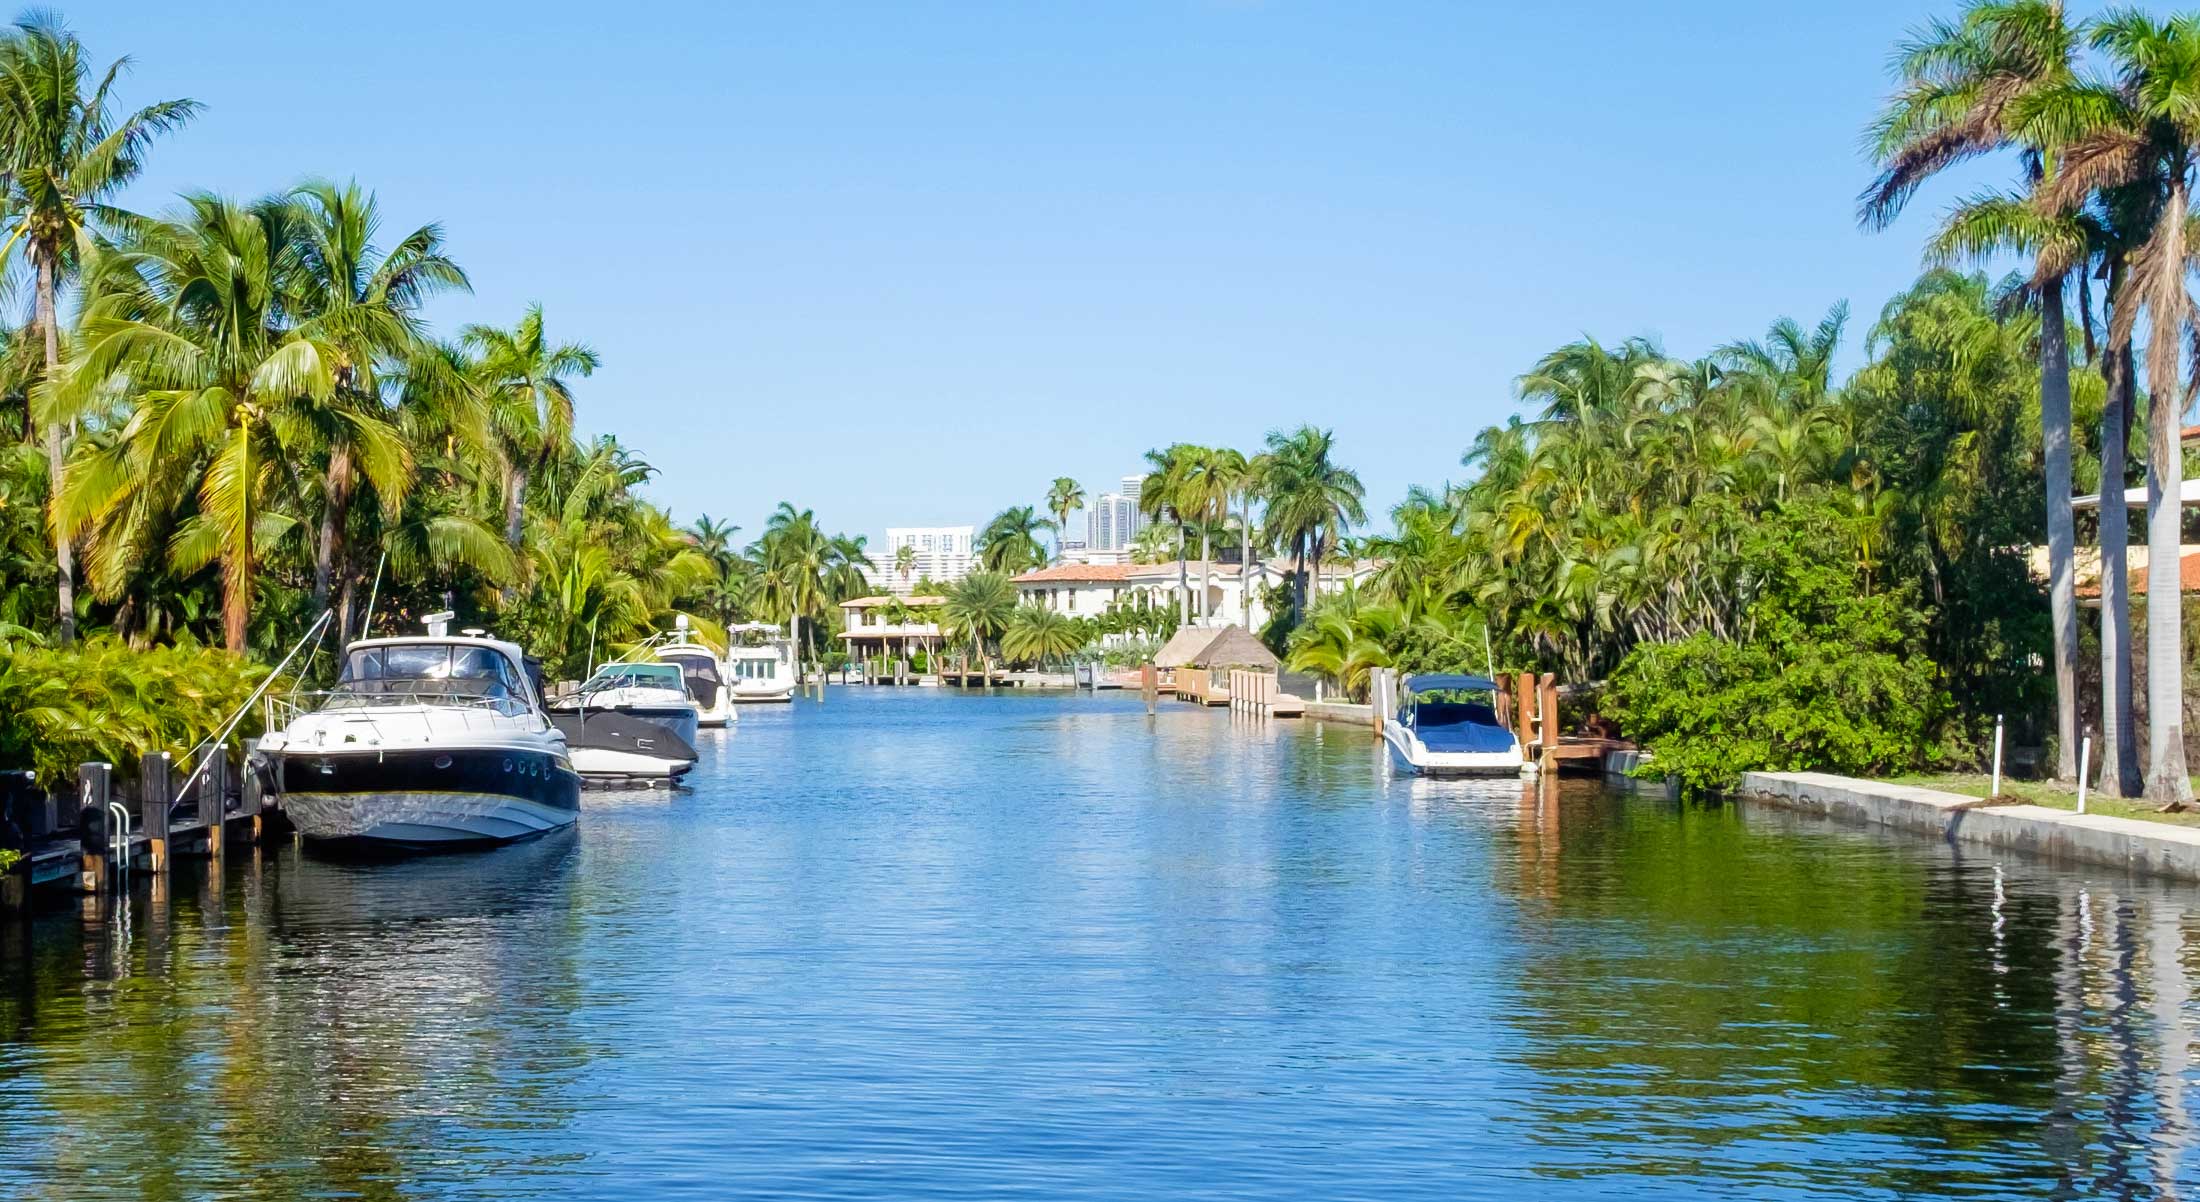 Canal, palm trees, boats and homes.